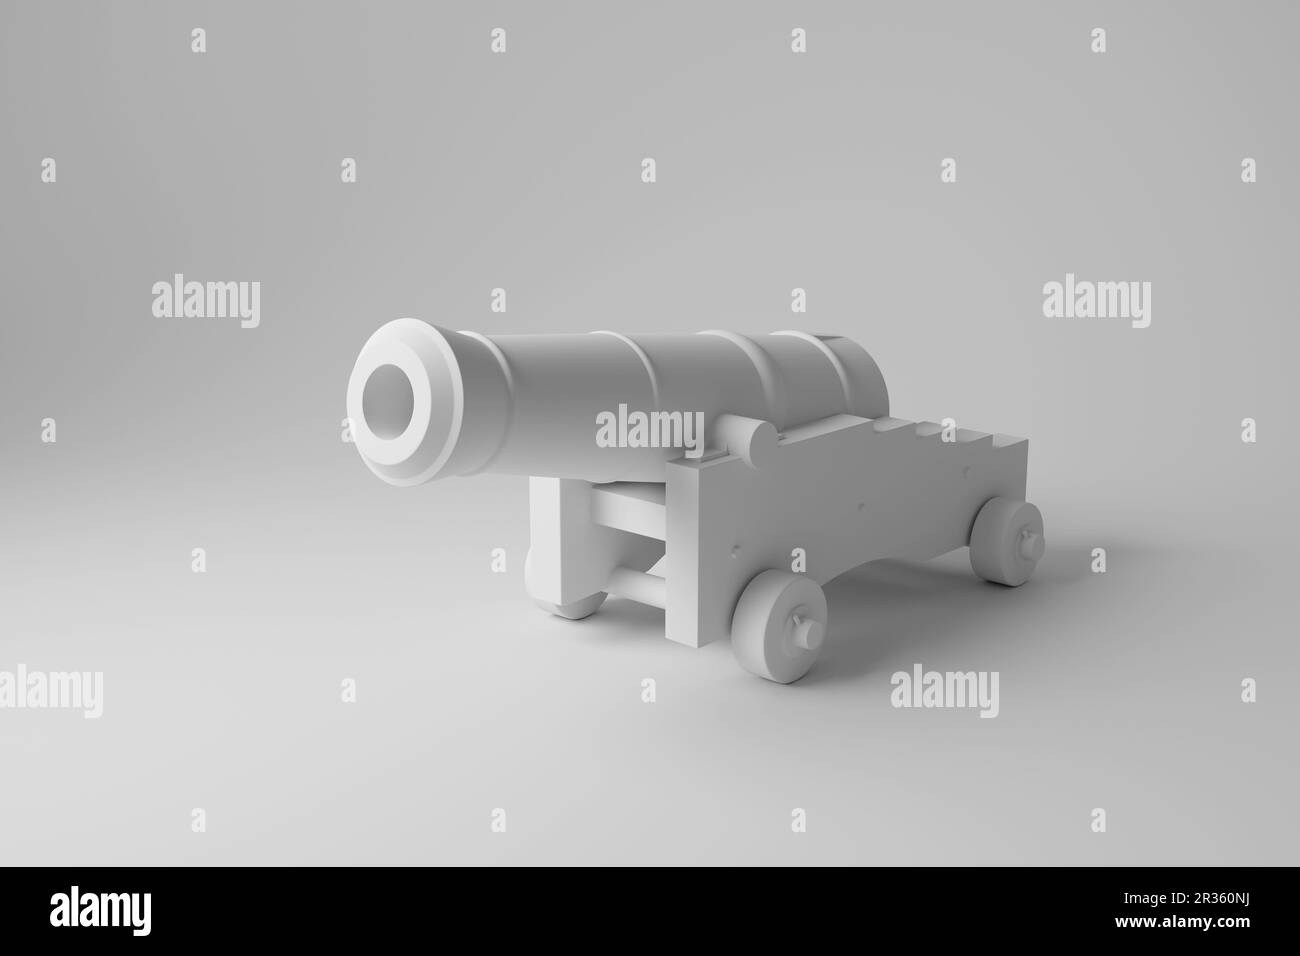 Stylized white cannon on white background with shadow in grayscale monochrome. Illustration of the concept of war, conflict and weaponry Stock Photo